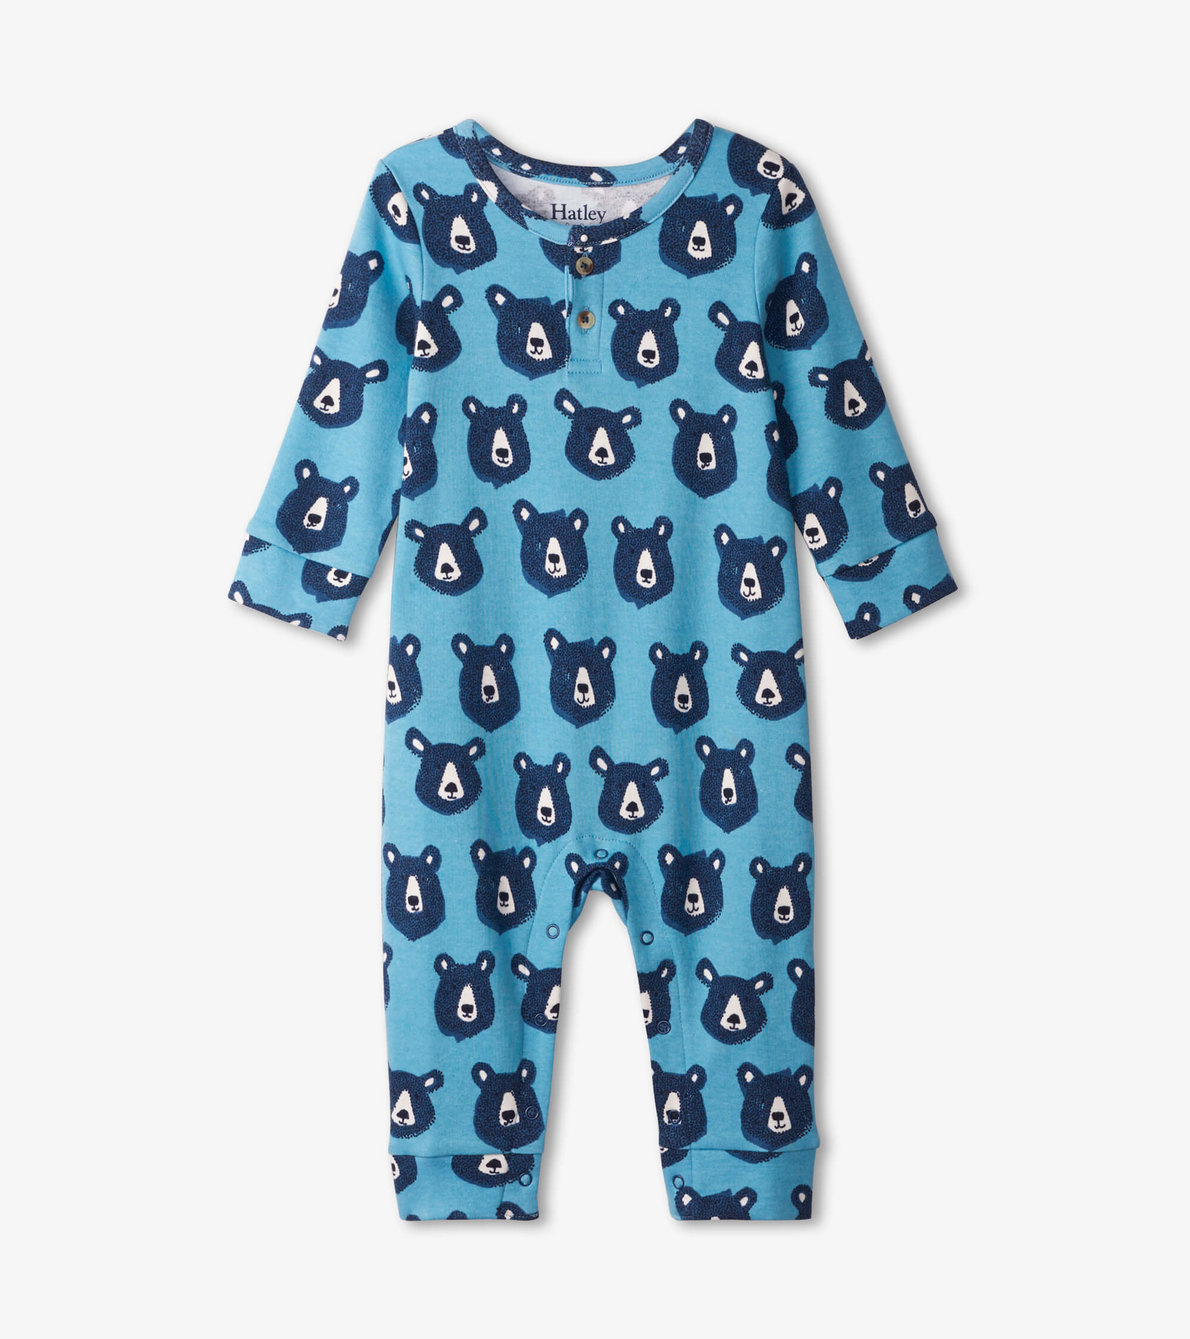 View larger image of Blue Bears Baby Henley Romper